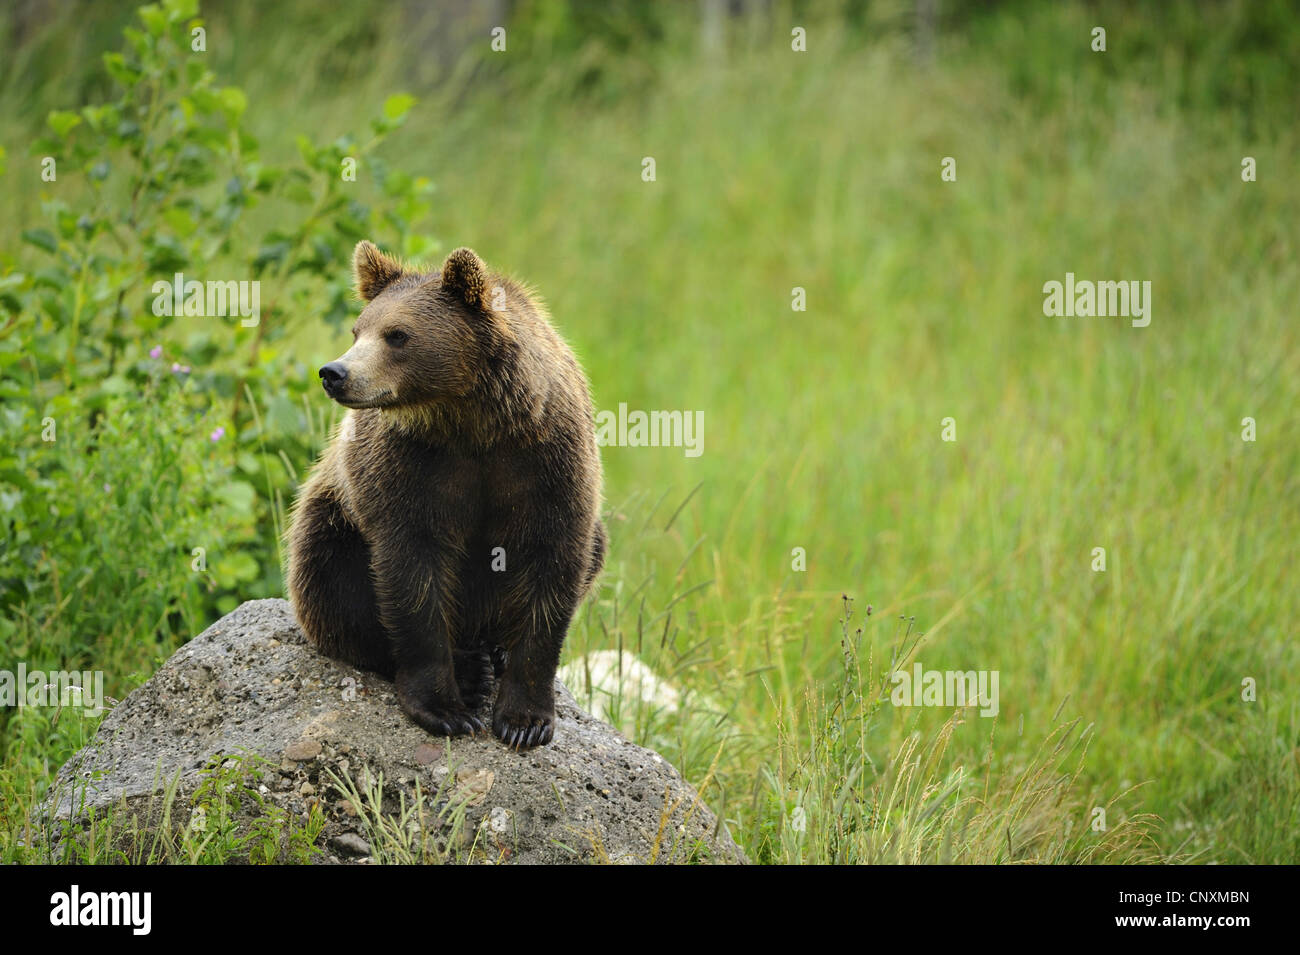 European brown bear (Ursus arctos arctos), sitting on a rock in a meadow at the edge of a forest, Germany, Bavaria, Bavarian Forest National Park Stock Photo